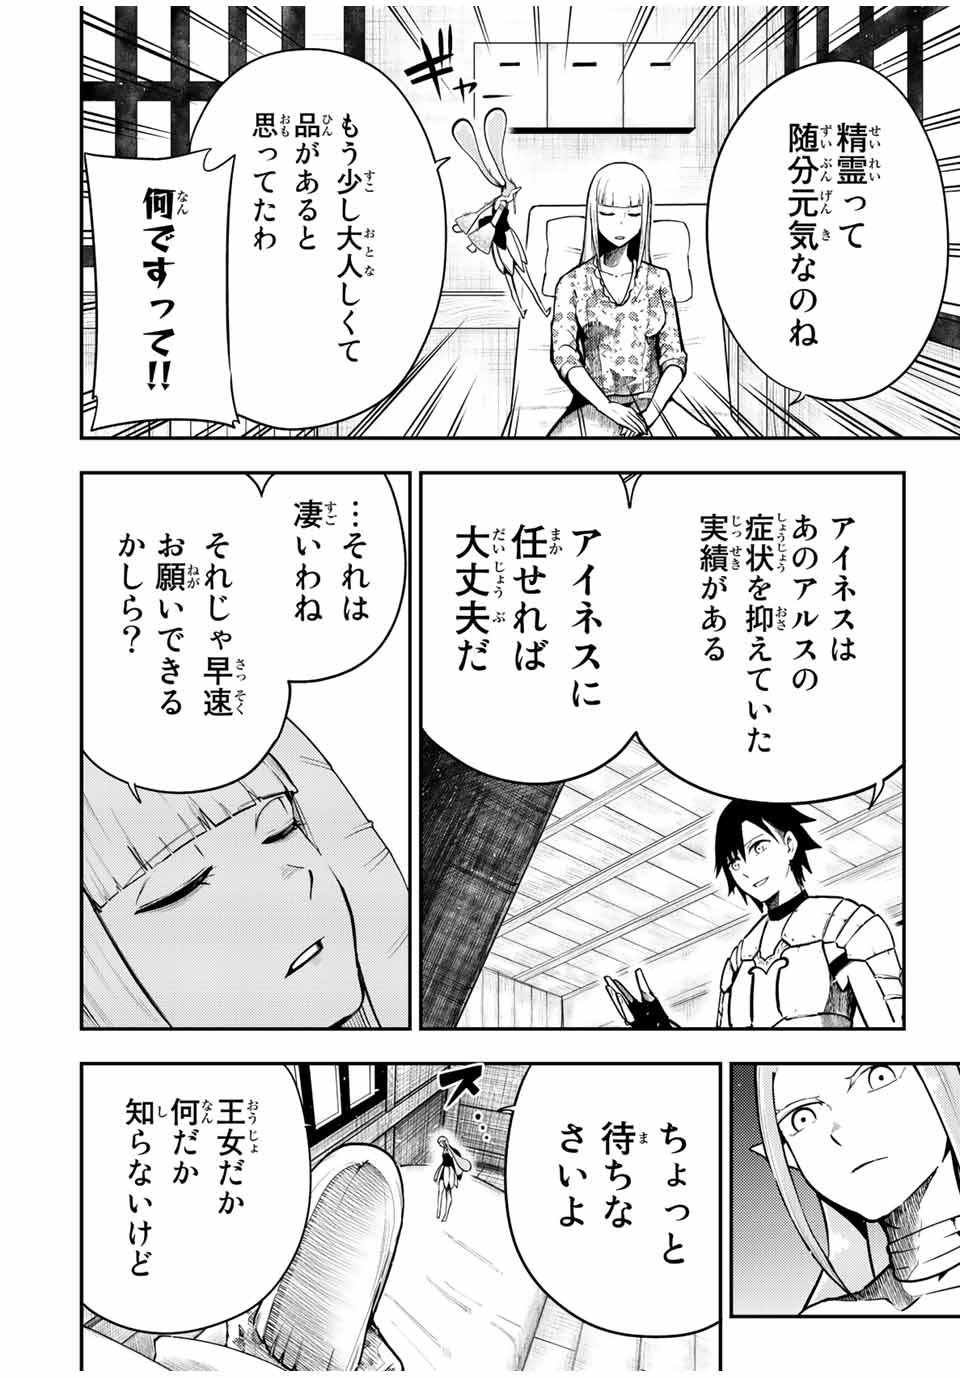 the strongest former prince-; 奴隷転生 ～その奴隷、最強の元王子につき～ 第78話 - Page 10